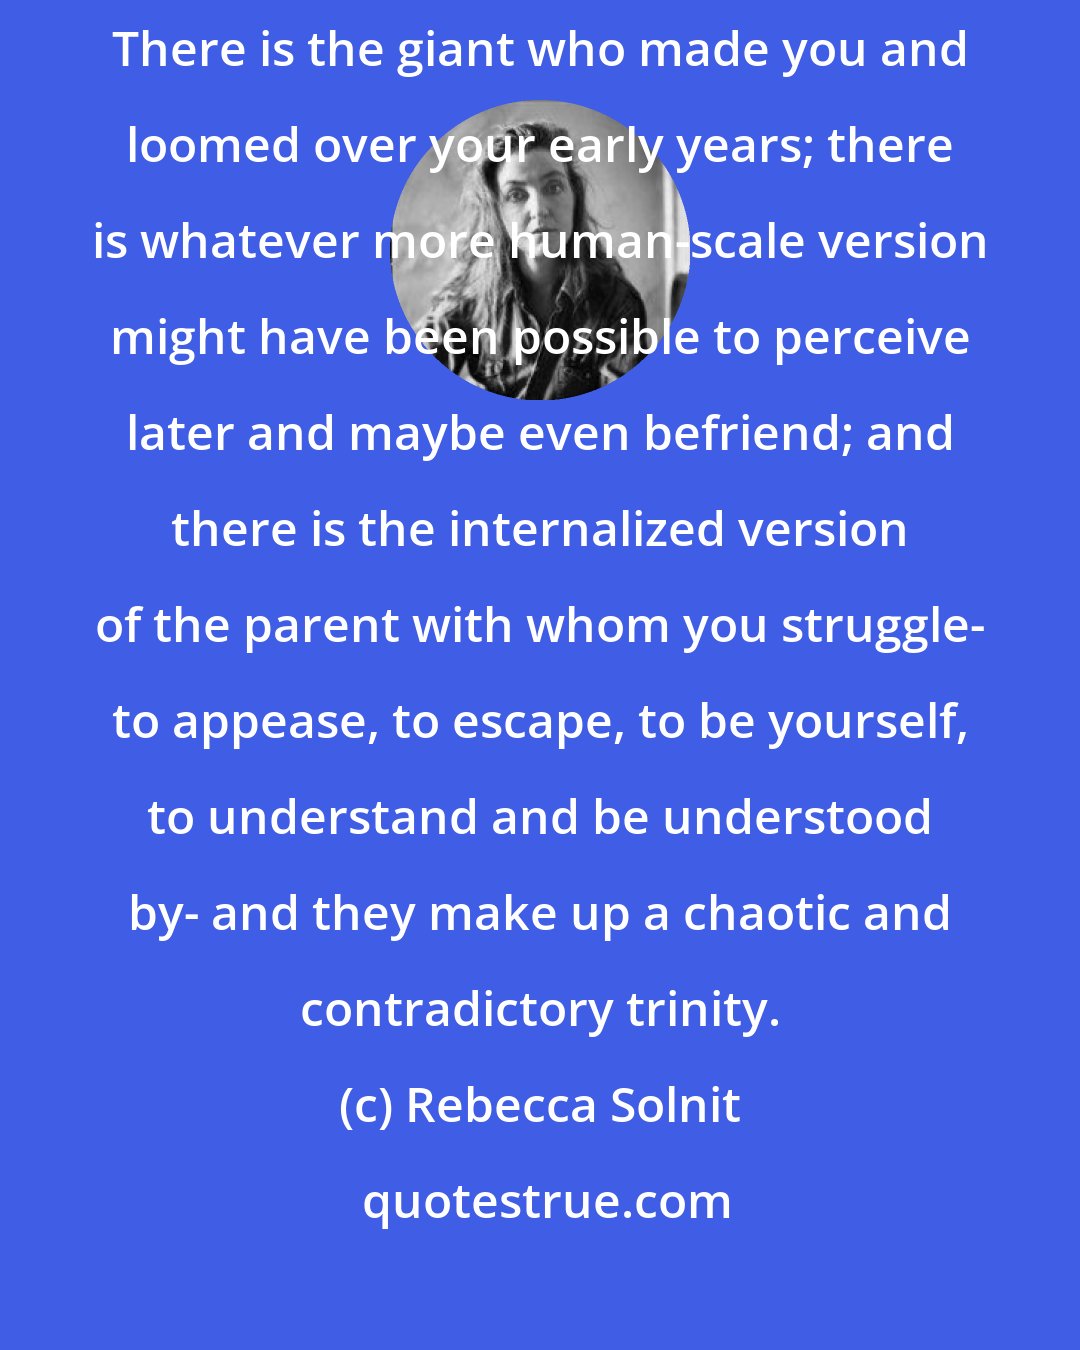 Rebecca Solnit: When you say 'mother' or 'father' you describe three different phenomena. There is the giant who made you and loomed over your early years; there is whatever more human-scale version might have been possible to perceive later and maybe even befriend; and there is the internalized version of the parent with whom you struggle- to appease, to escape, to be yourself, to understand and be understood by- and they make up a chaotic and contradictory trinity.